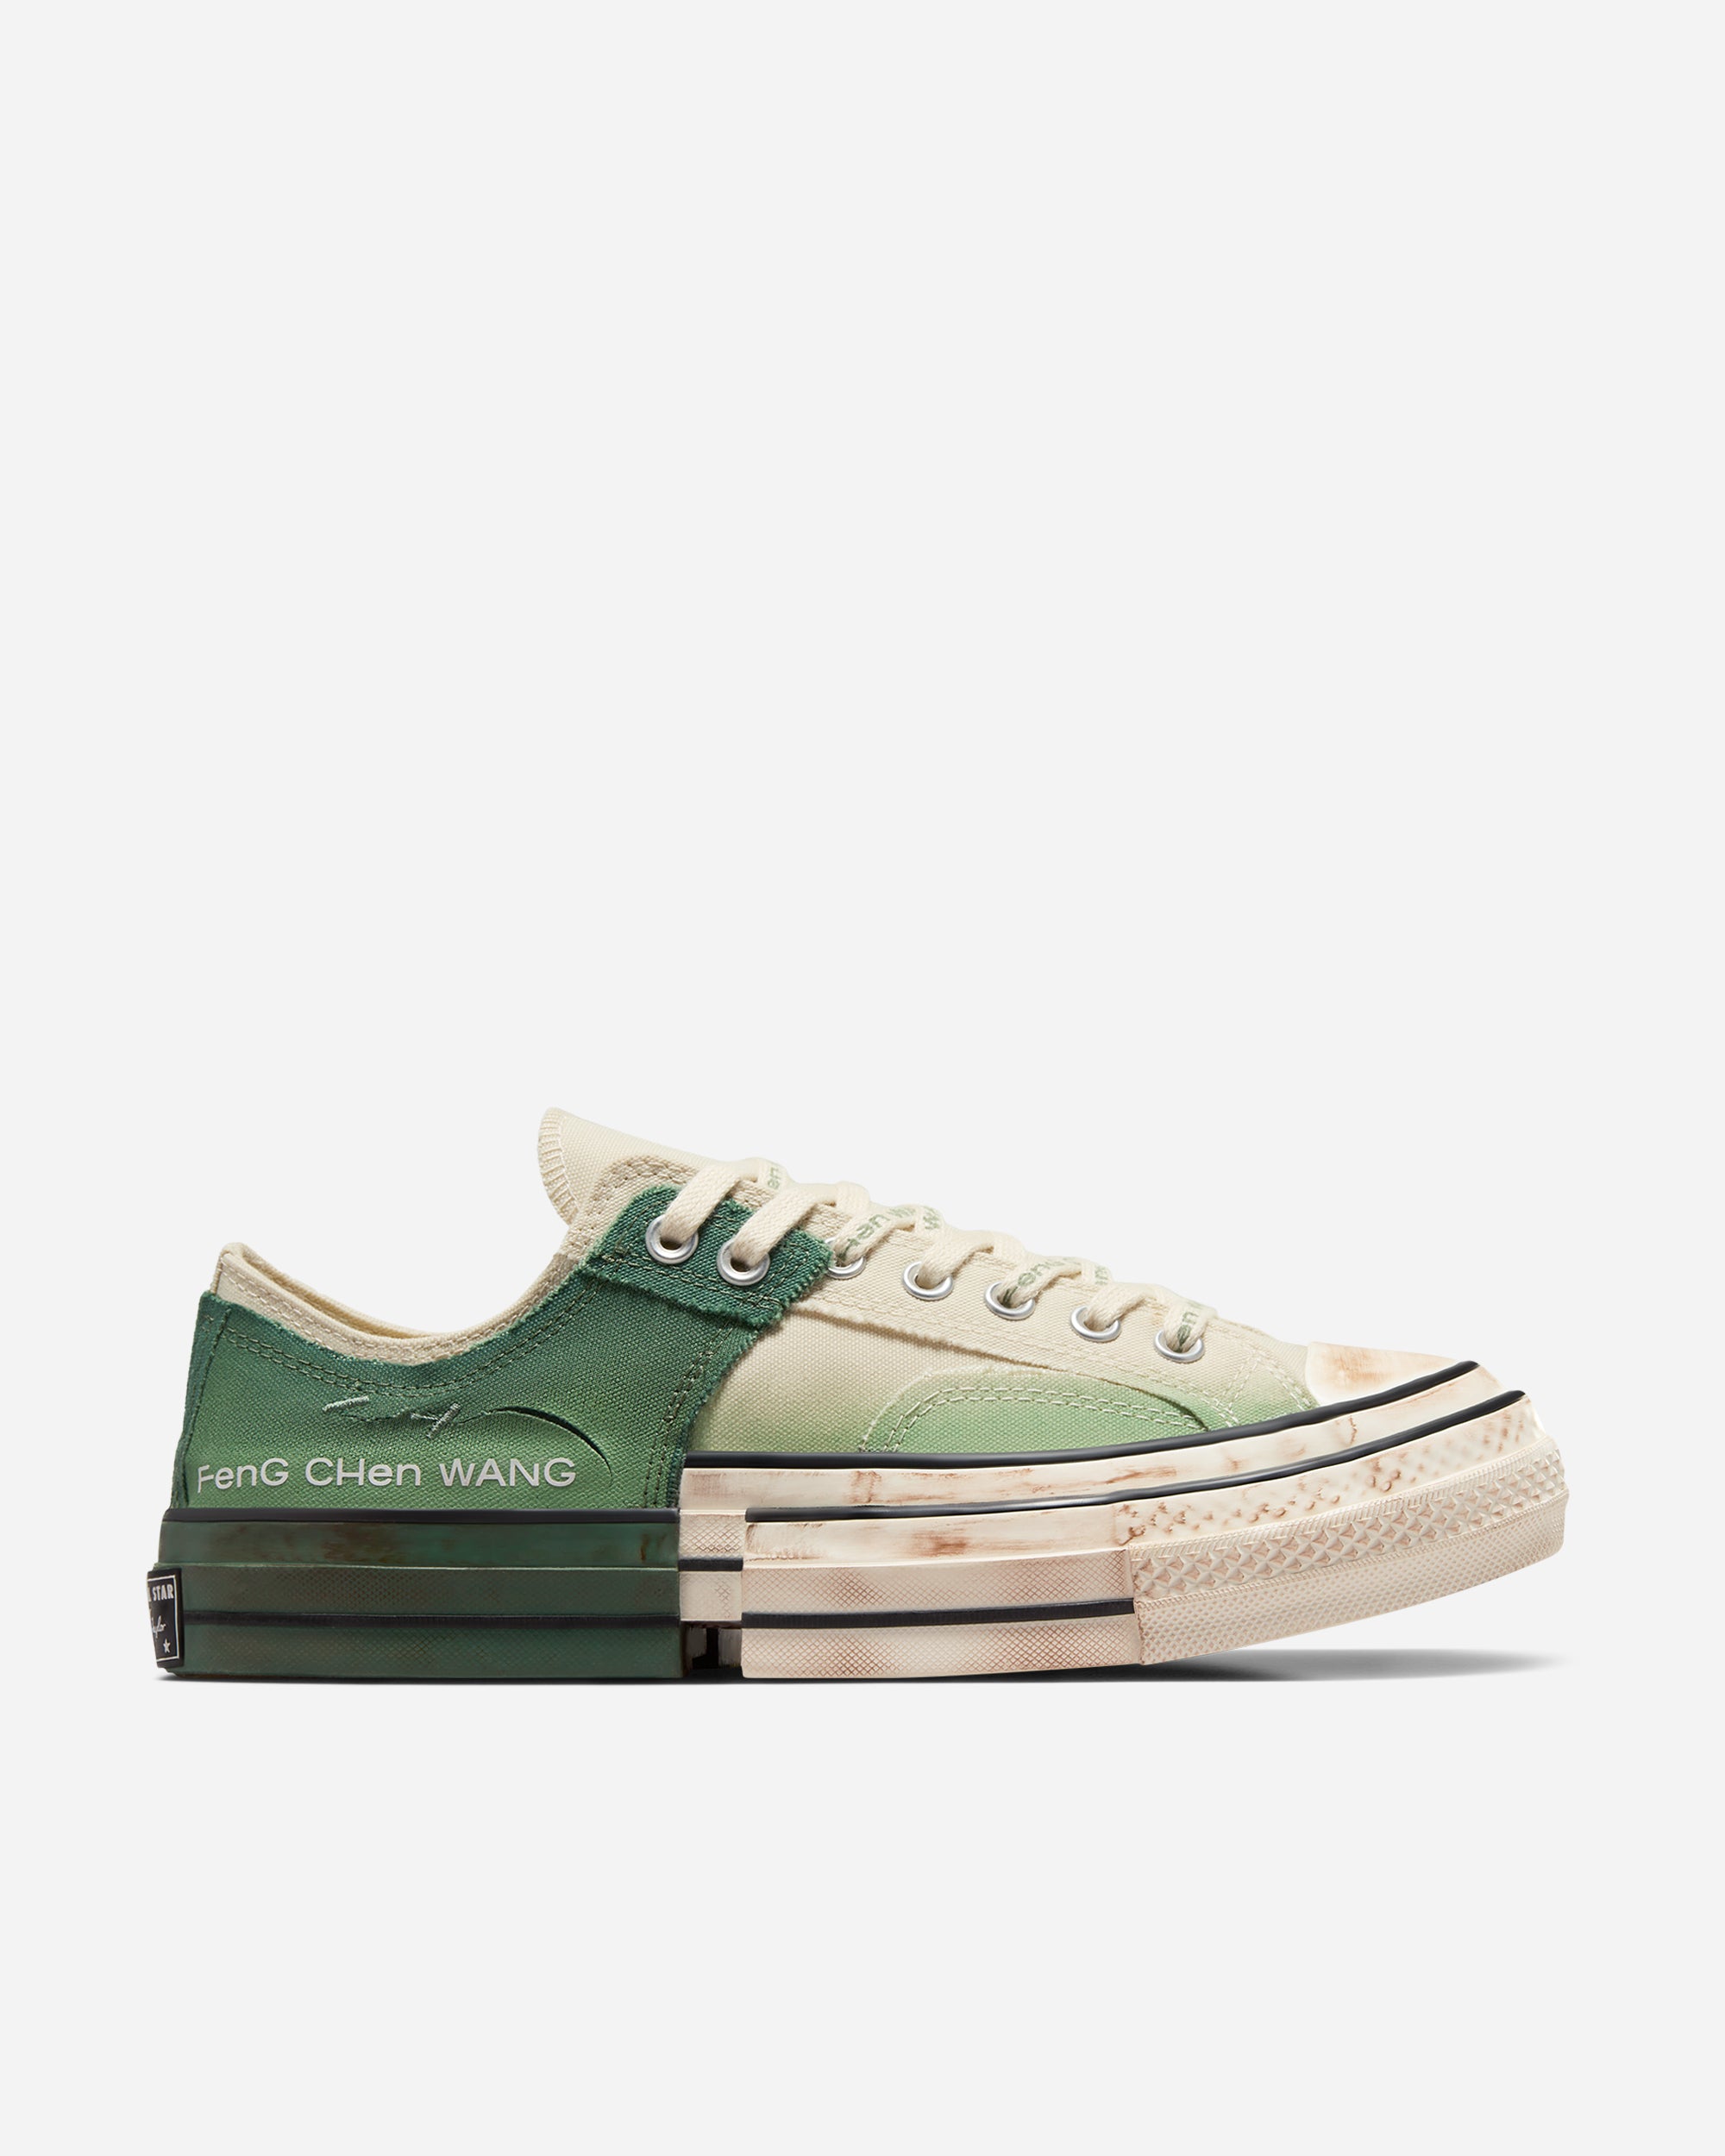 Converse Converse x Feng Chen Wang Chuck 70 2-in-1 Natural Ivory/Myrtle/Egret A07636C